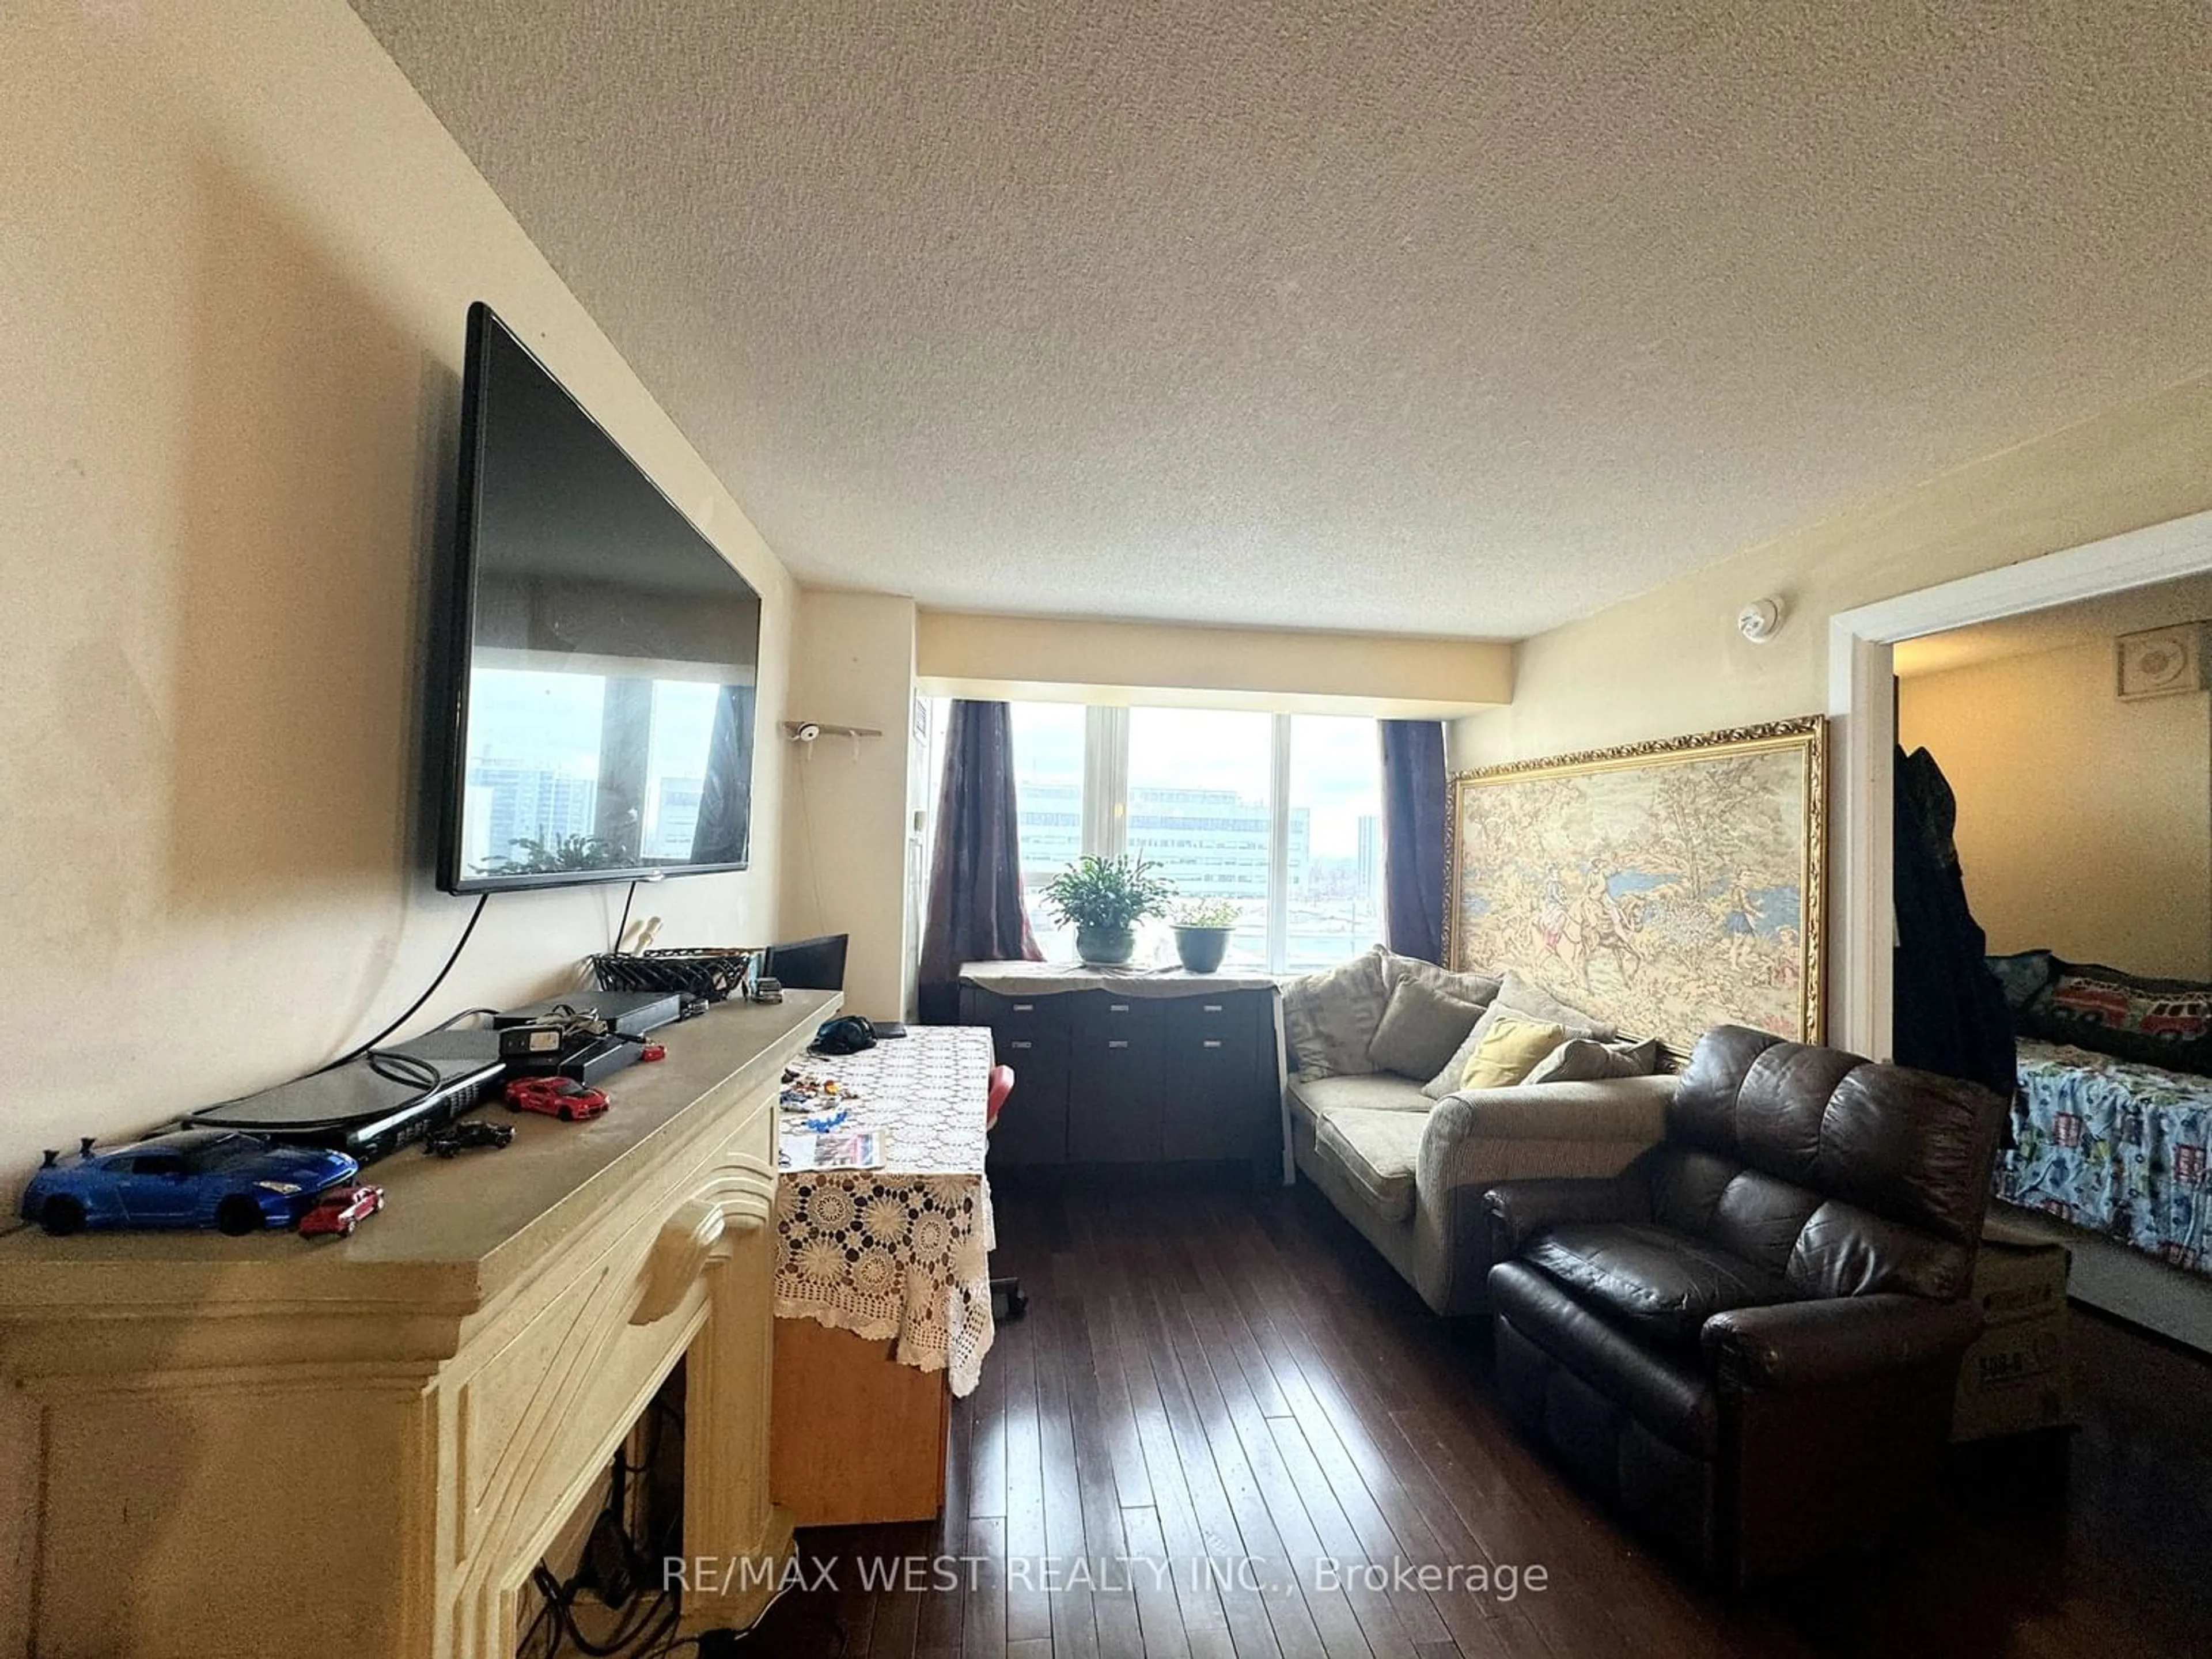 A pic of a room for 2737 Keele St #519, Toronto Ontario M3M 2E9